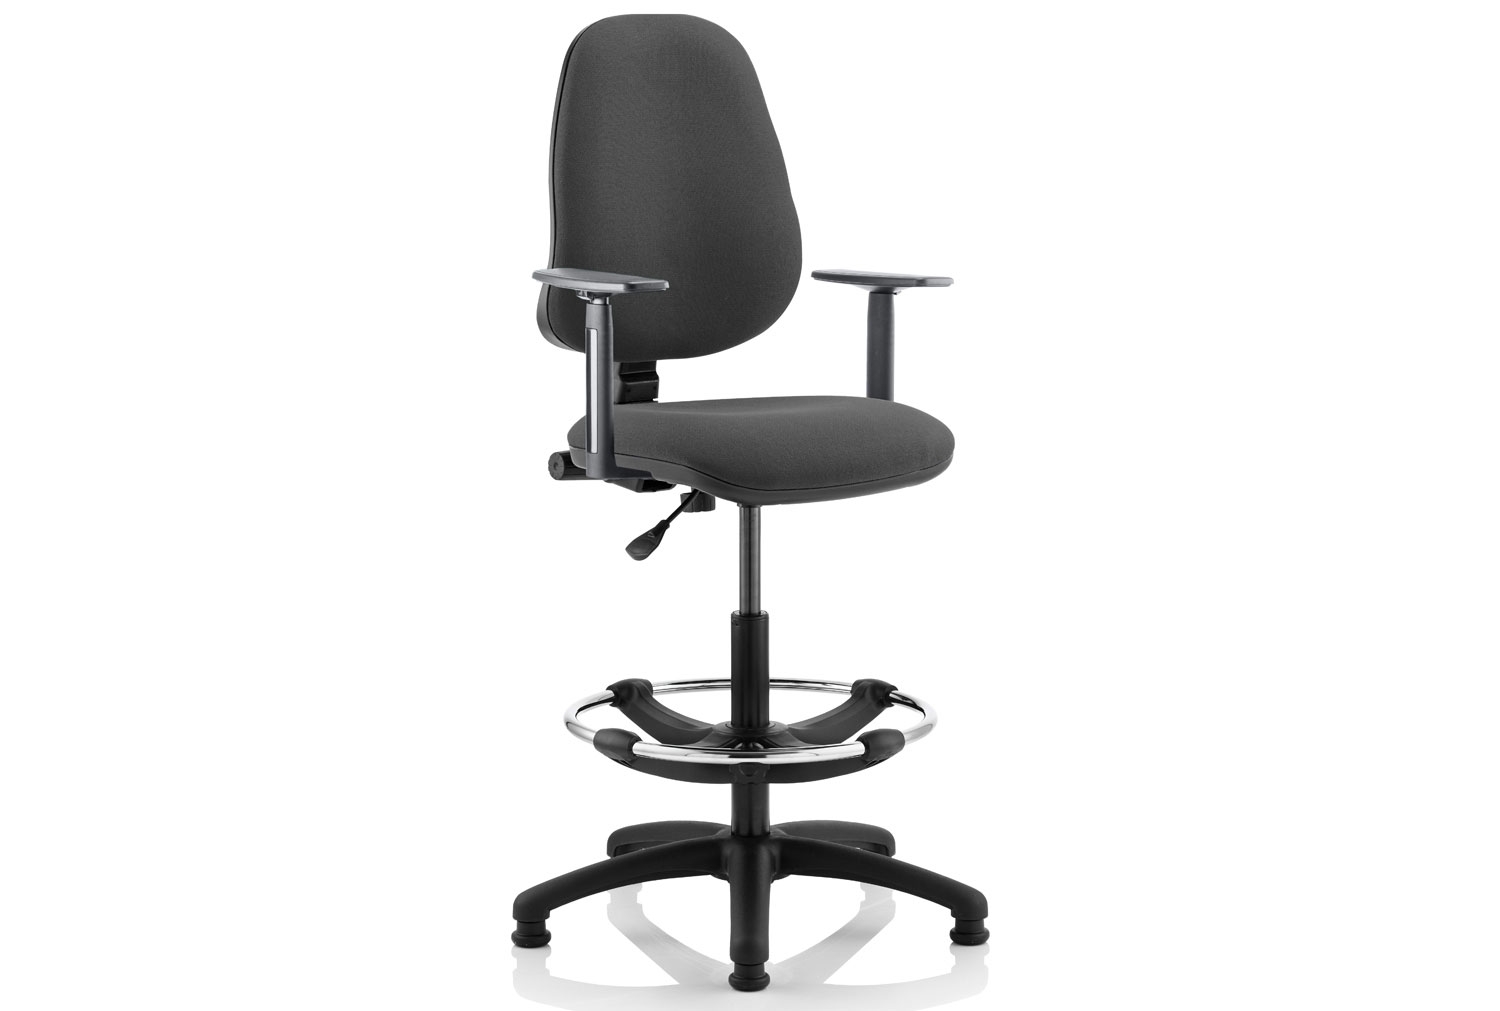 Lunar 1 Lever High Back Fabric Draughtsman Office Chair (Adjustable Arms), Charcoal, Express Delivery